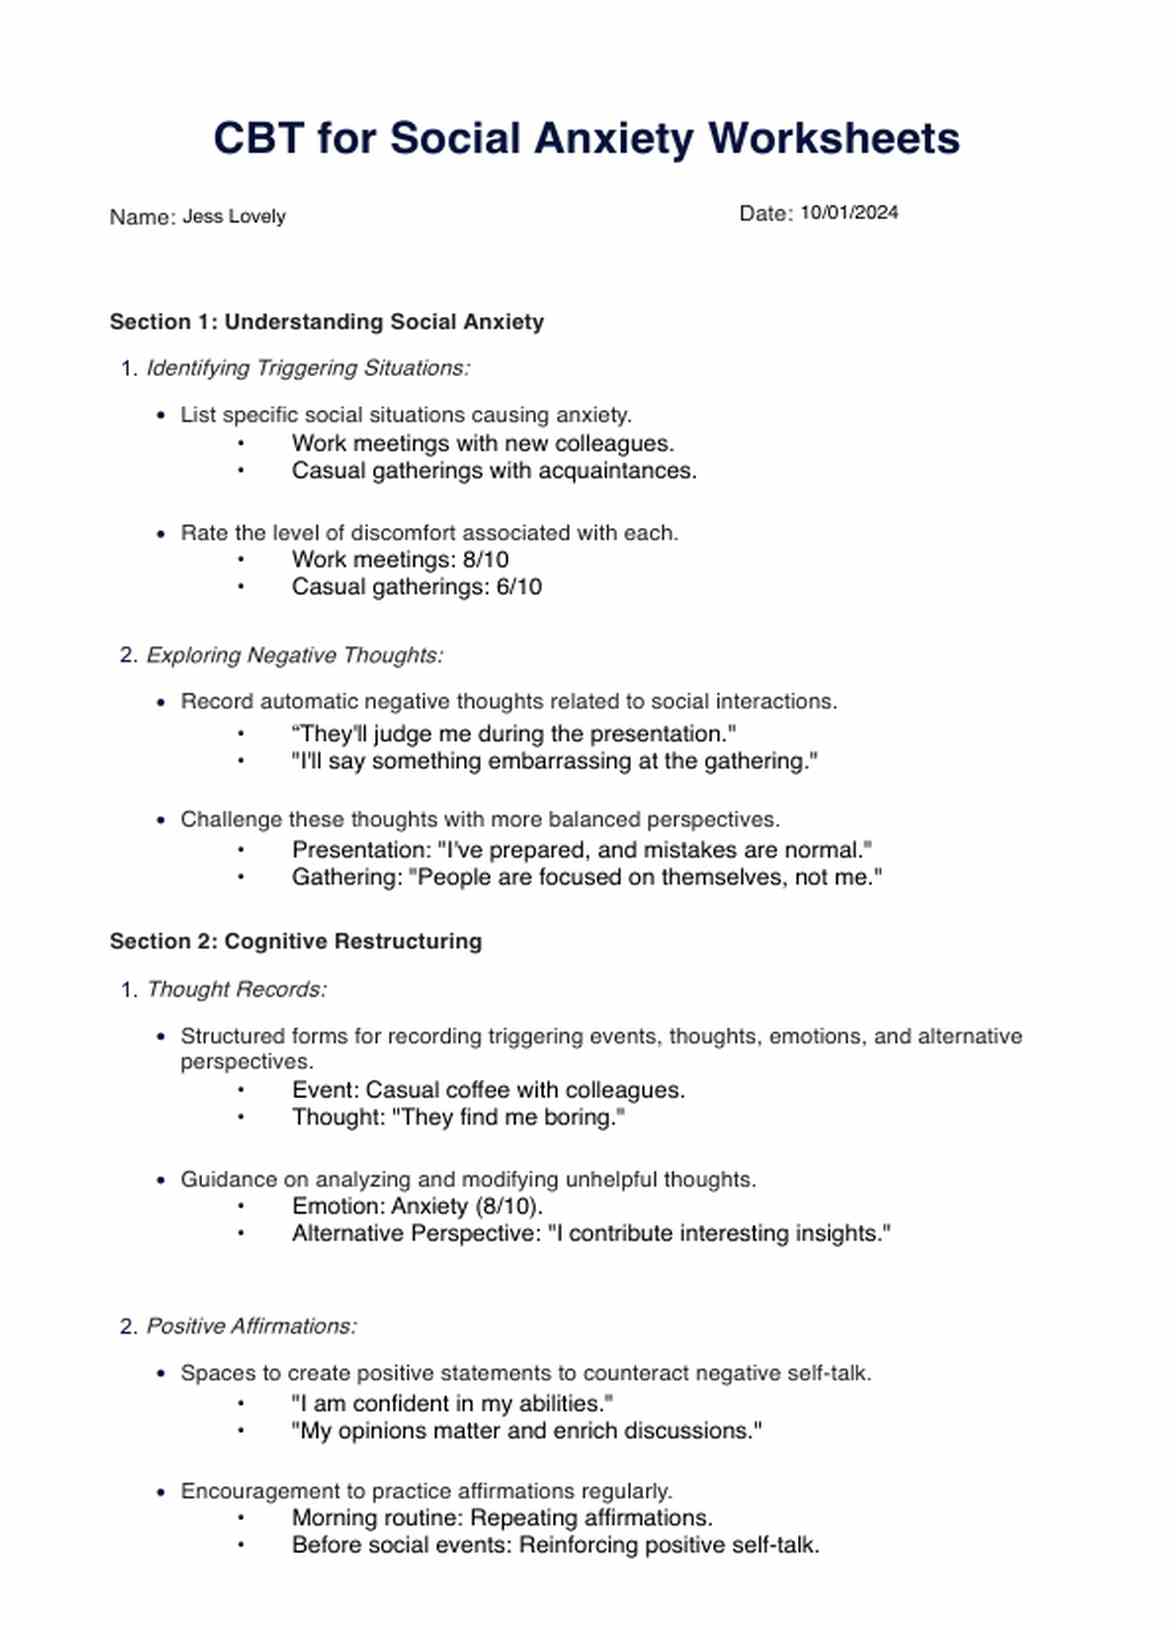 CBT for Social Anxiety Worksheets PDF PDF Example